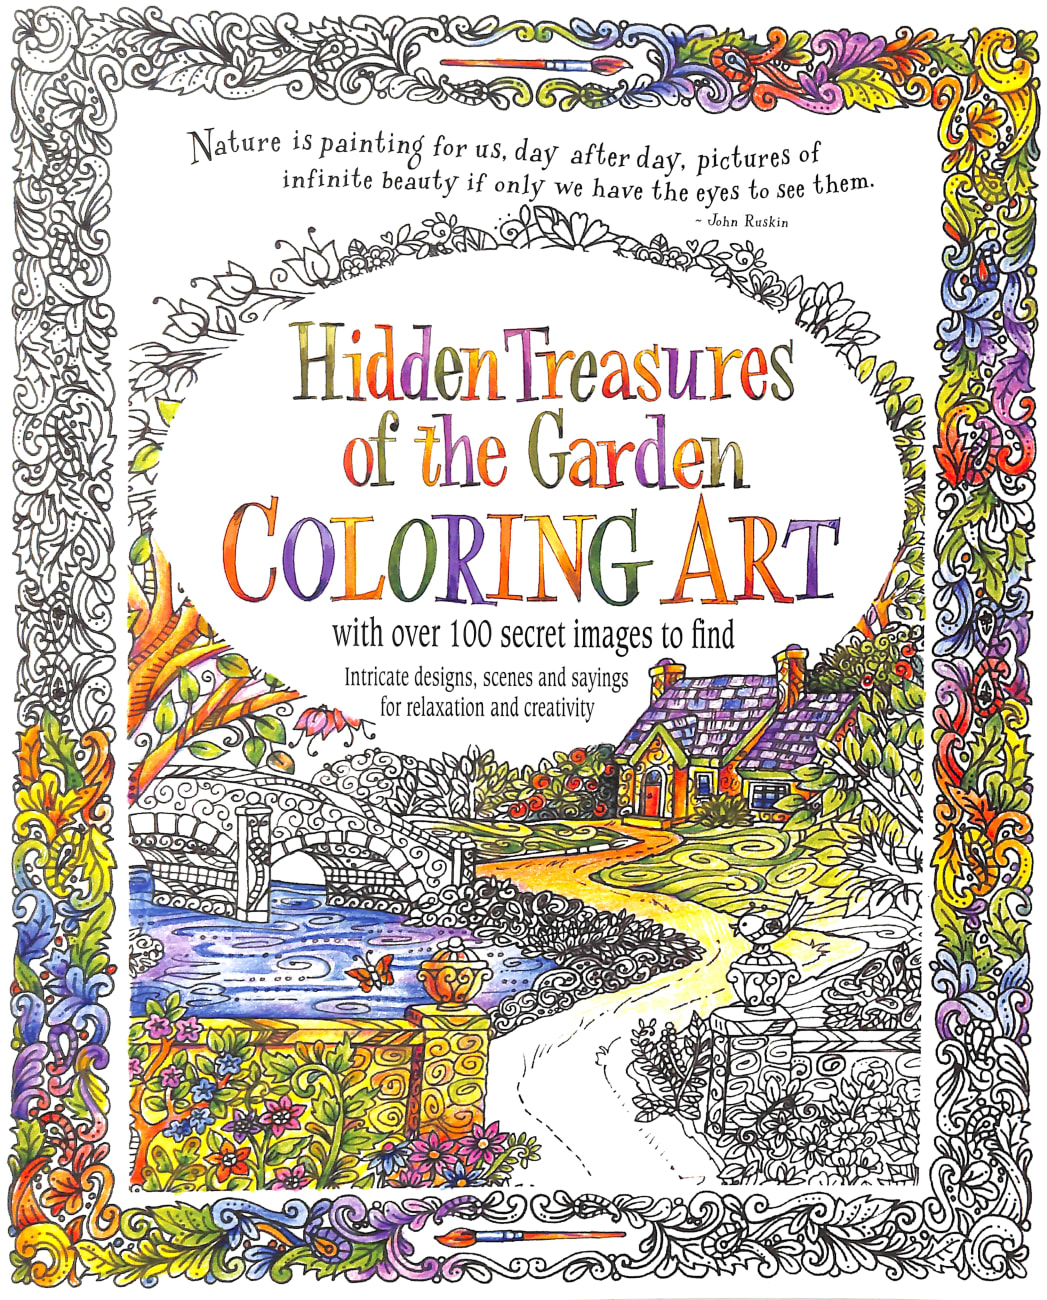 Hidden Treasures From the Garden (Adult Coloring Books Series) Paperback